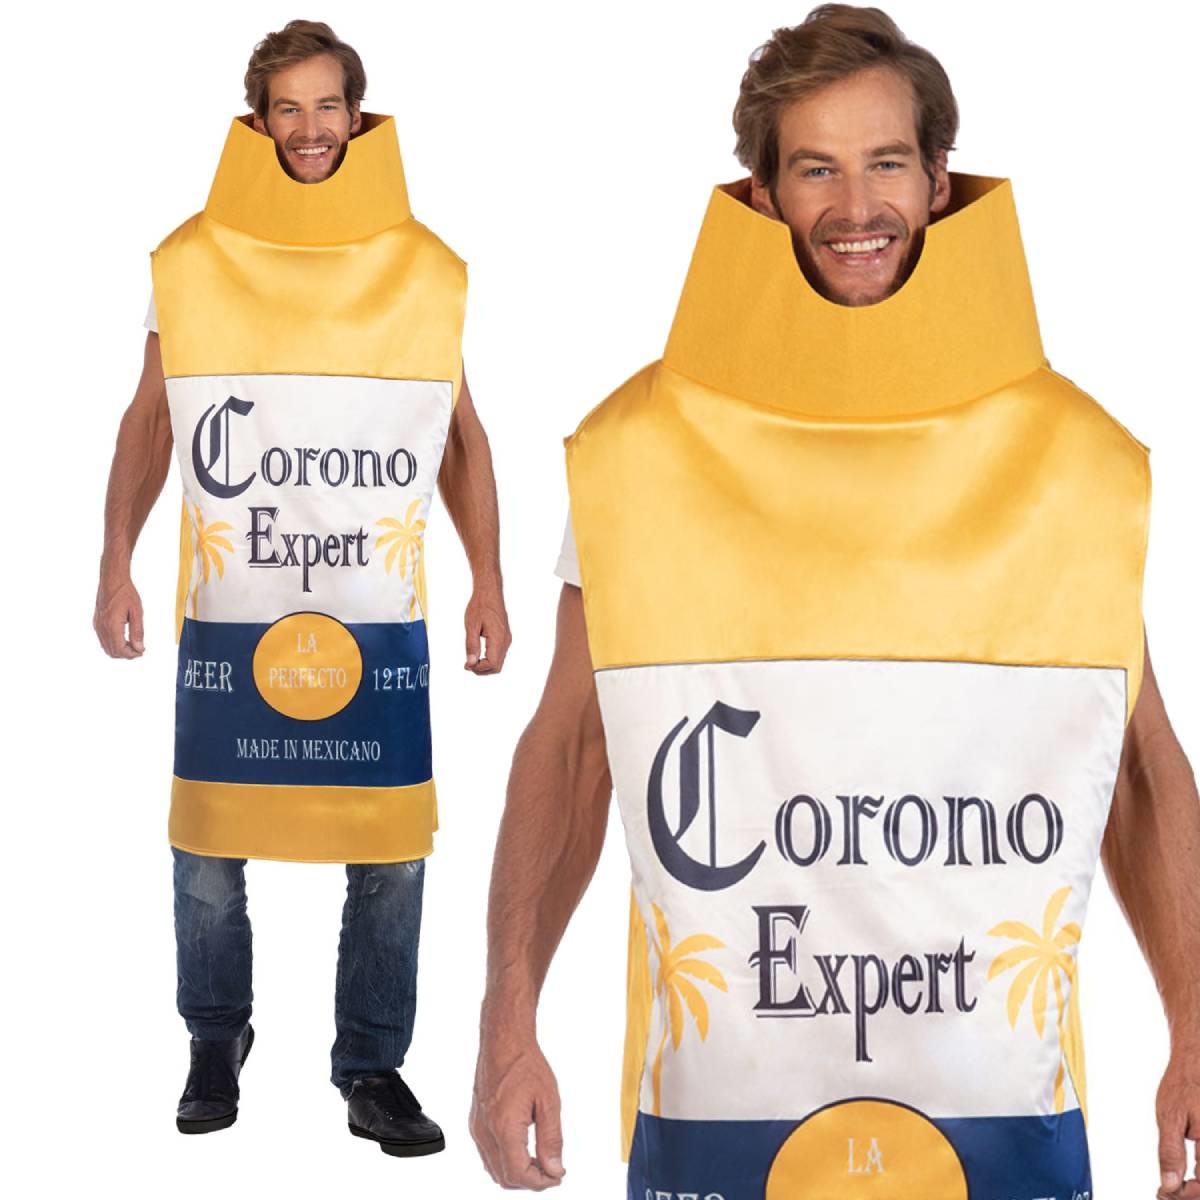 Corono Expert Yellow Beer Bottle Costume by Amscan 9908754 available here at Karnival Costumes online party shop